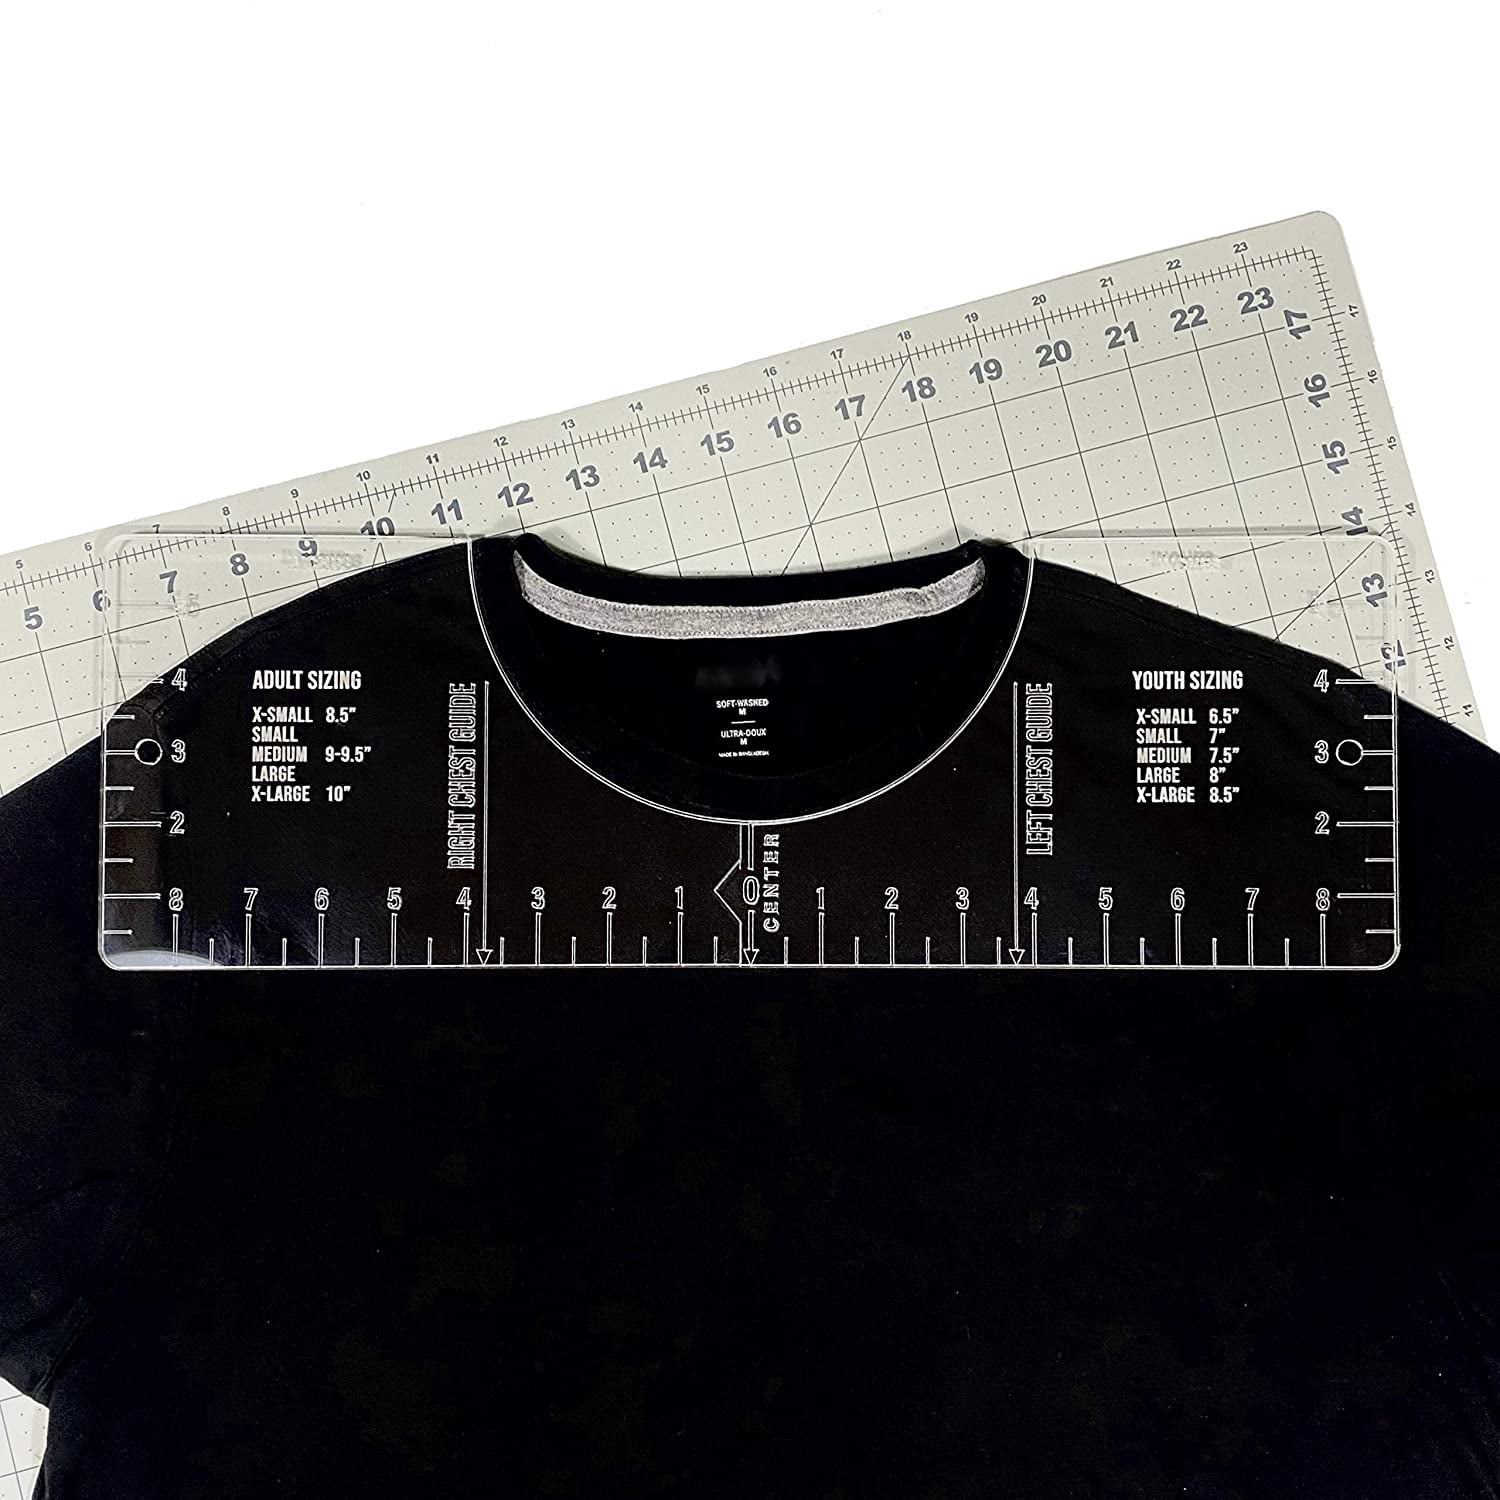 T-Shirt Alignment Ruler Tools for Applying Vinyl and Sublimation Designs T-Shirt Alignment Guide T-Shirt Ruler Guide T-Shirt Centering Tool for Fabric Cutting File Supplies 10x 6inches 